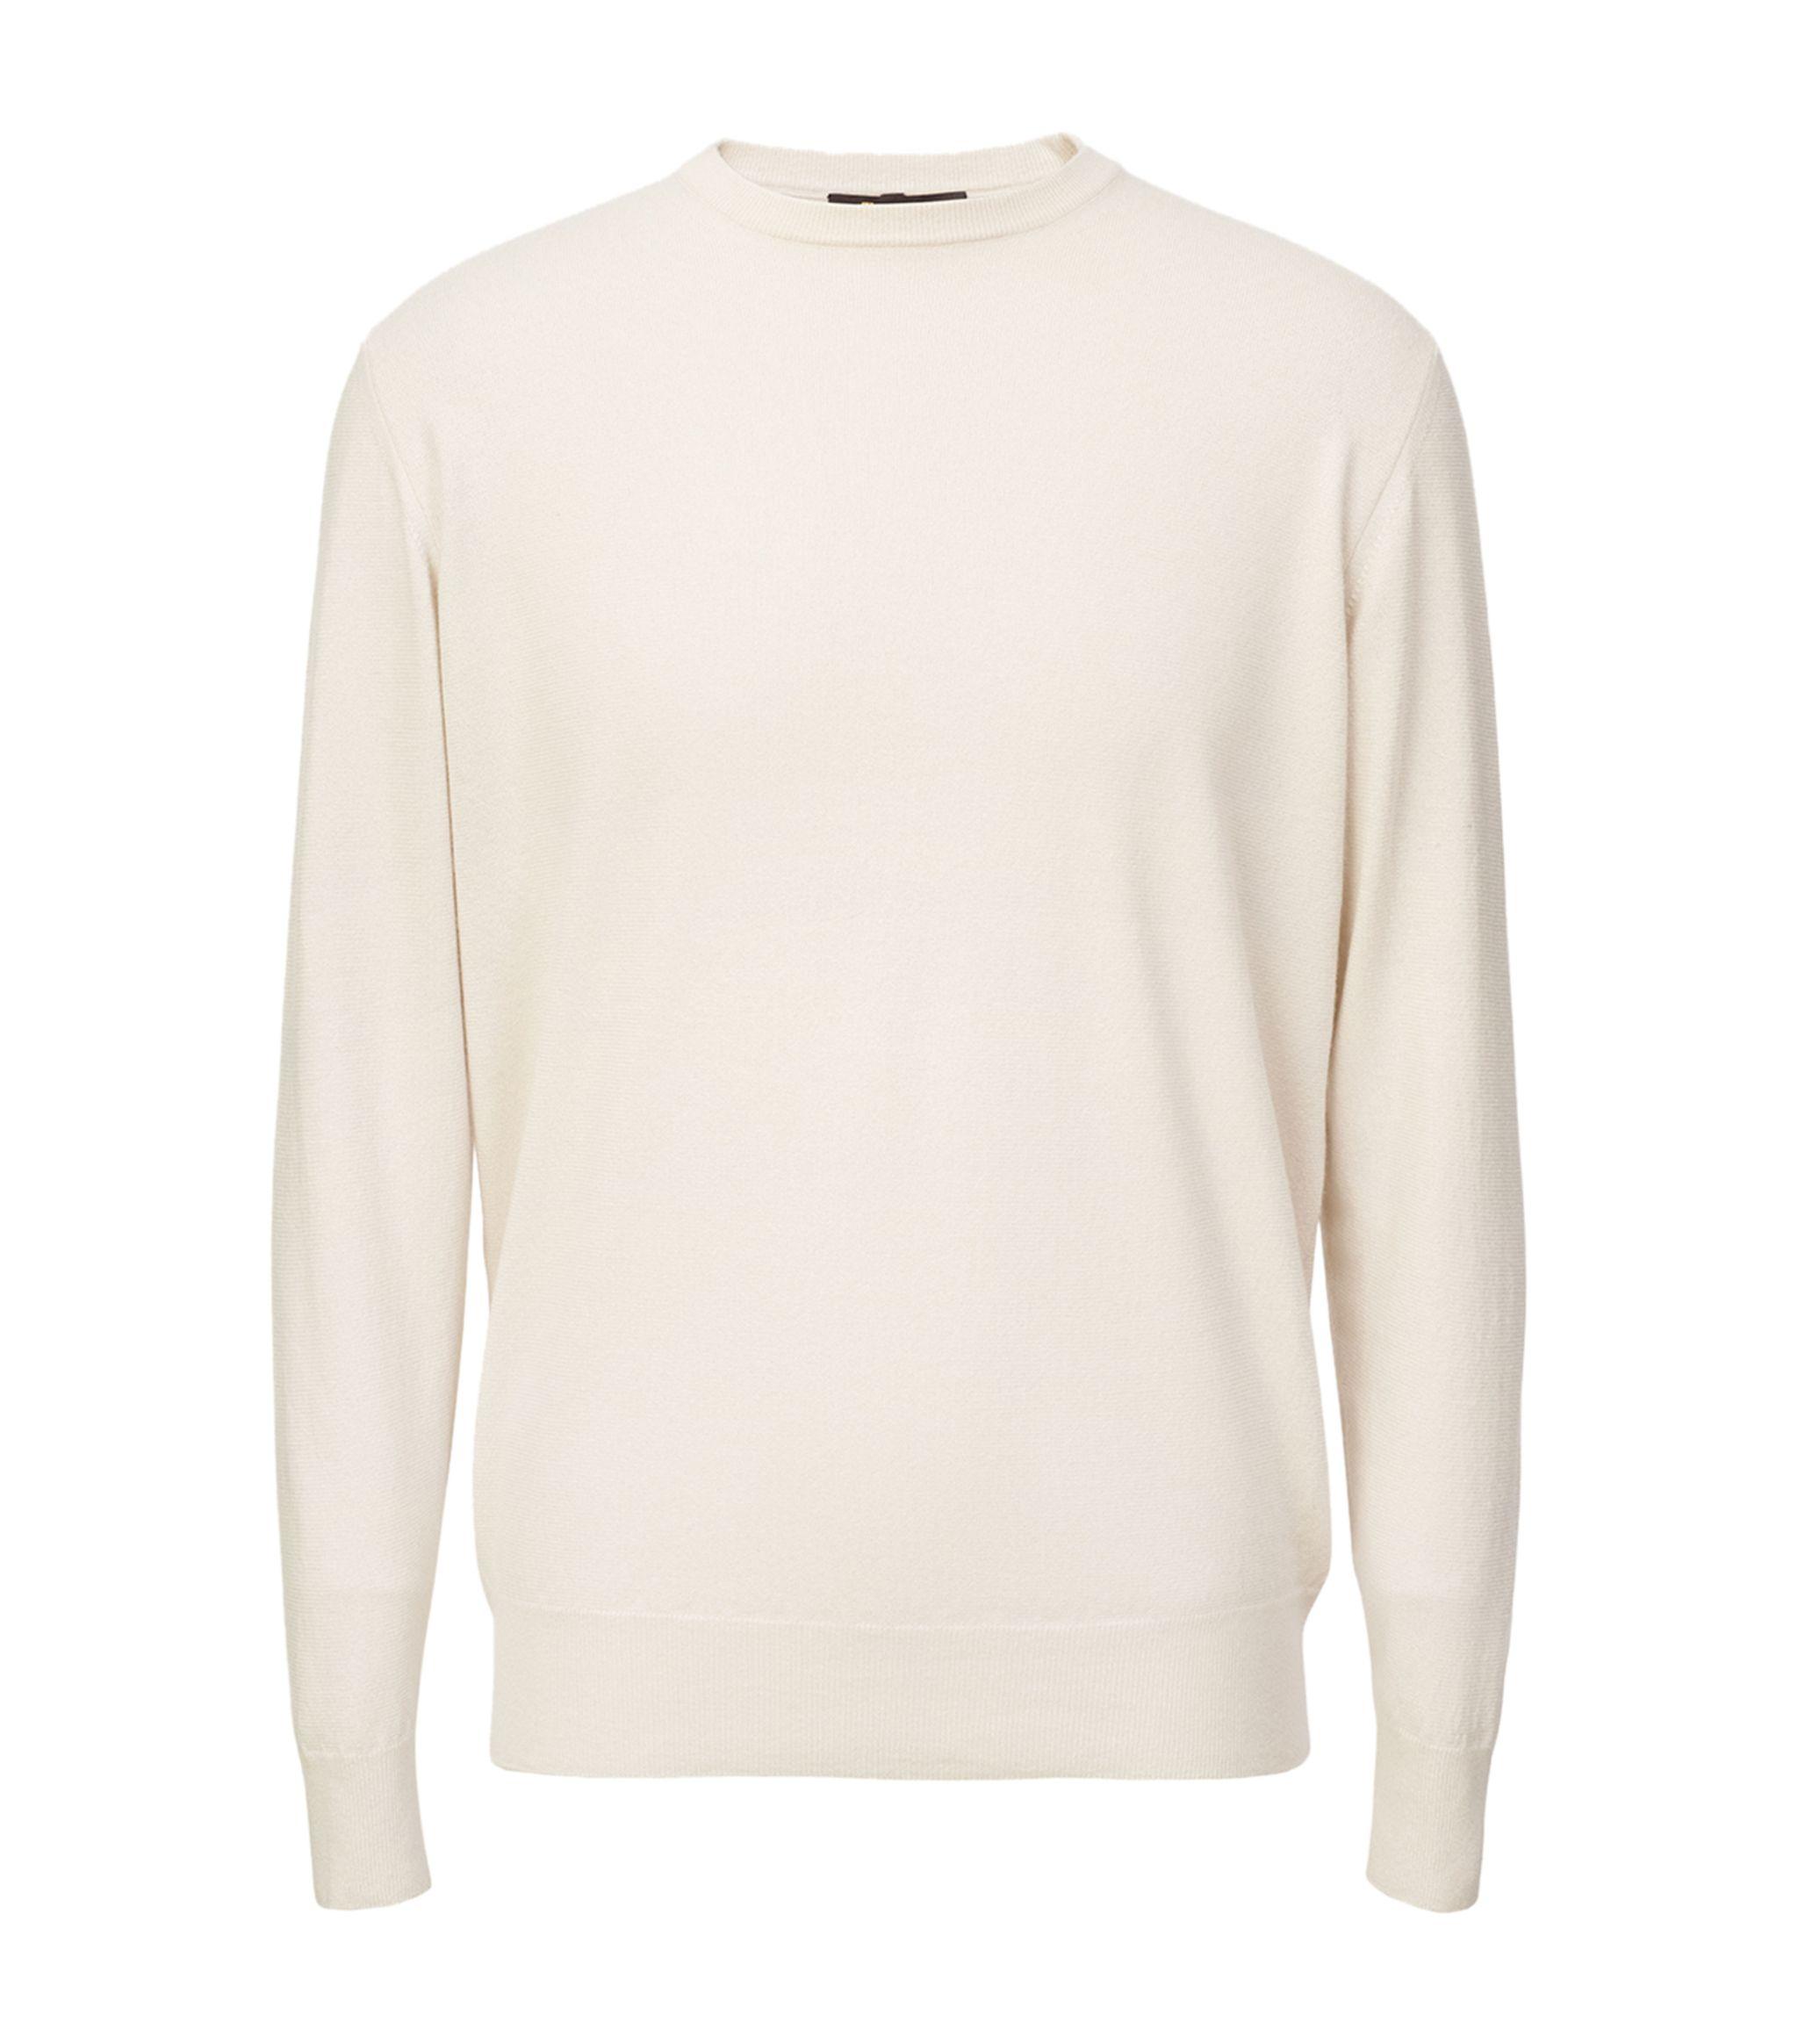 Loro Piana Baby Cashmere Knit Sweater in Gray for Men - Lyst